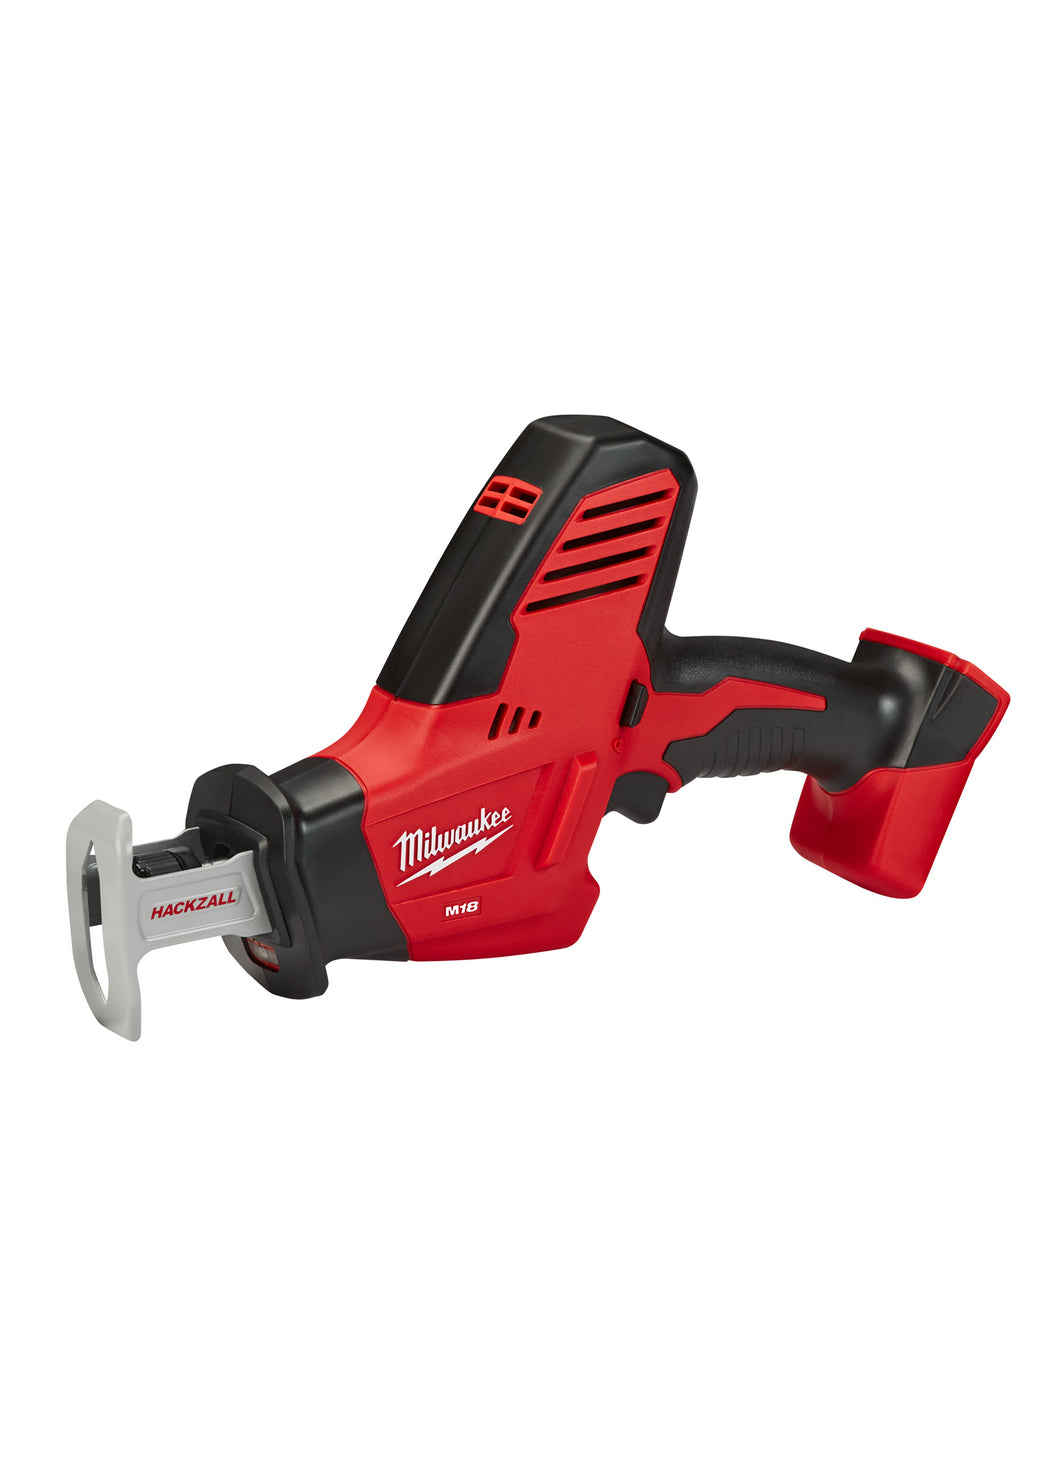 MILWAUKEE M18™ HACKZALL® Recip Saw (Tool Only)